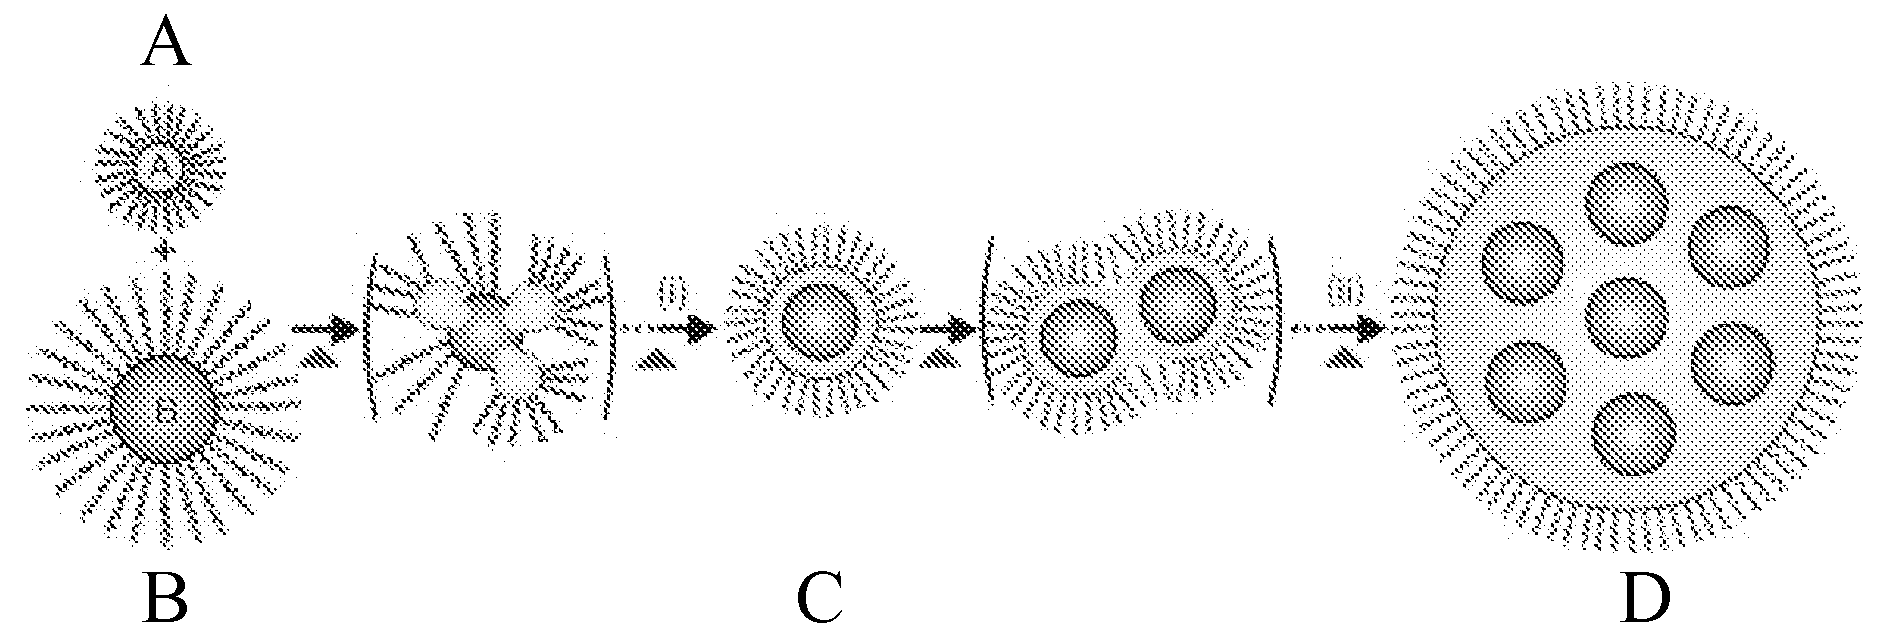 Core-shell nanoparticles with multiple cores and a method for fabricating them